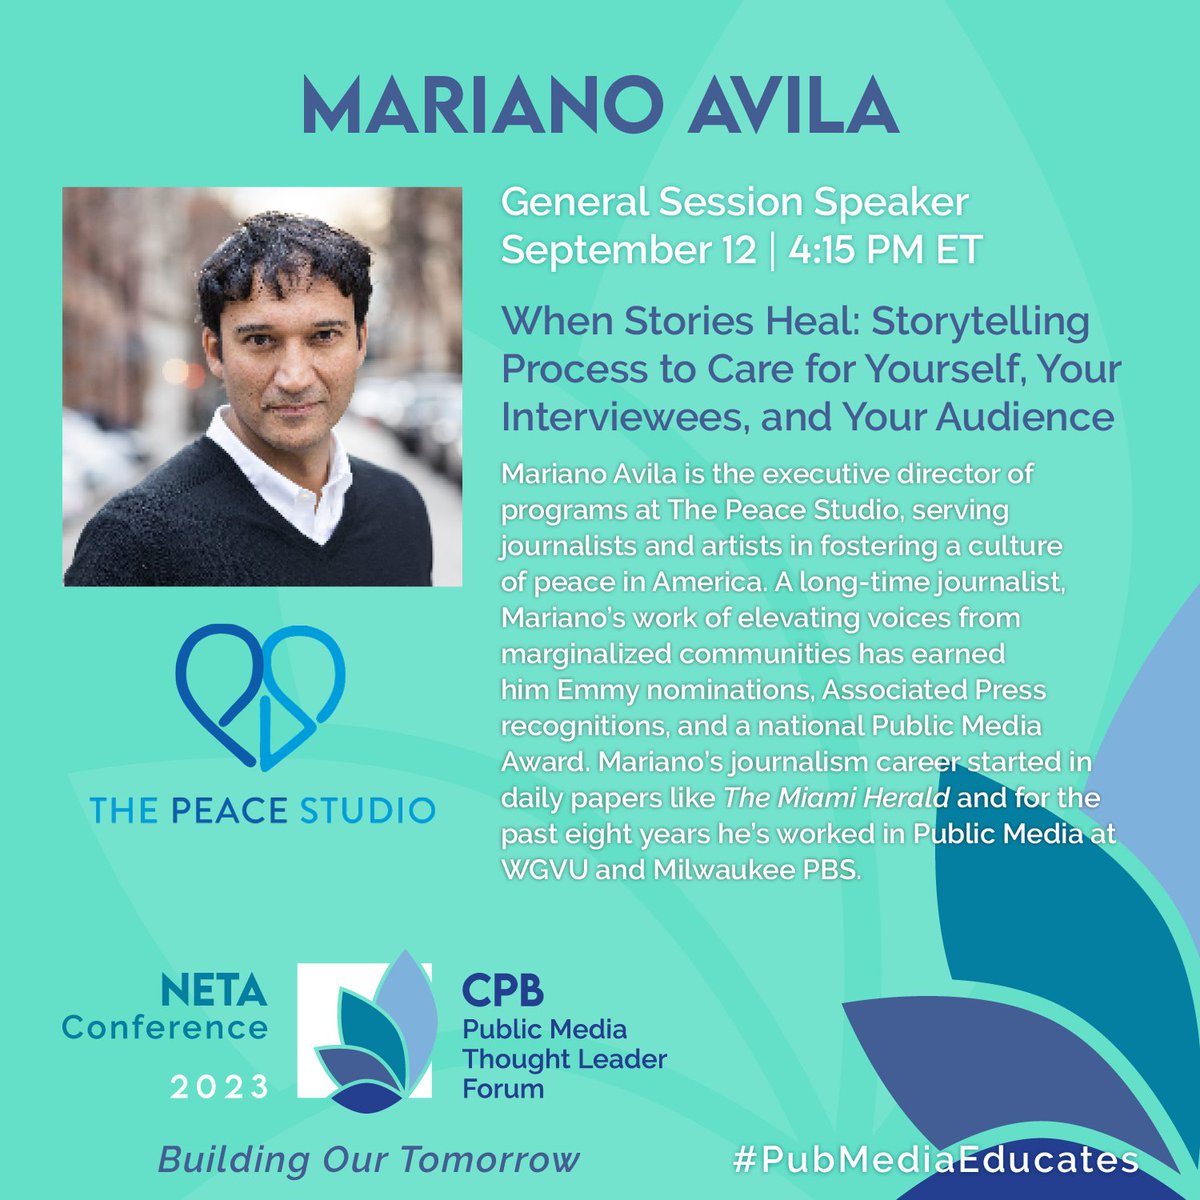 We are pleased to announce speaker @marianoavila from @ThePeaceStudio at the 2023 NETA Conference! He'll discuss how restorative narrative can help your impact on your community. annualnetaconference.org @cpbmedia #publicmedia #pubmedia #pubmediaeducates #NETAconference